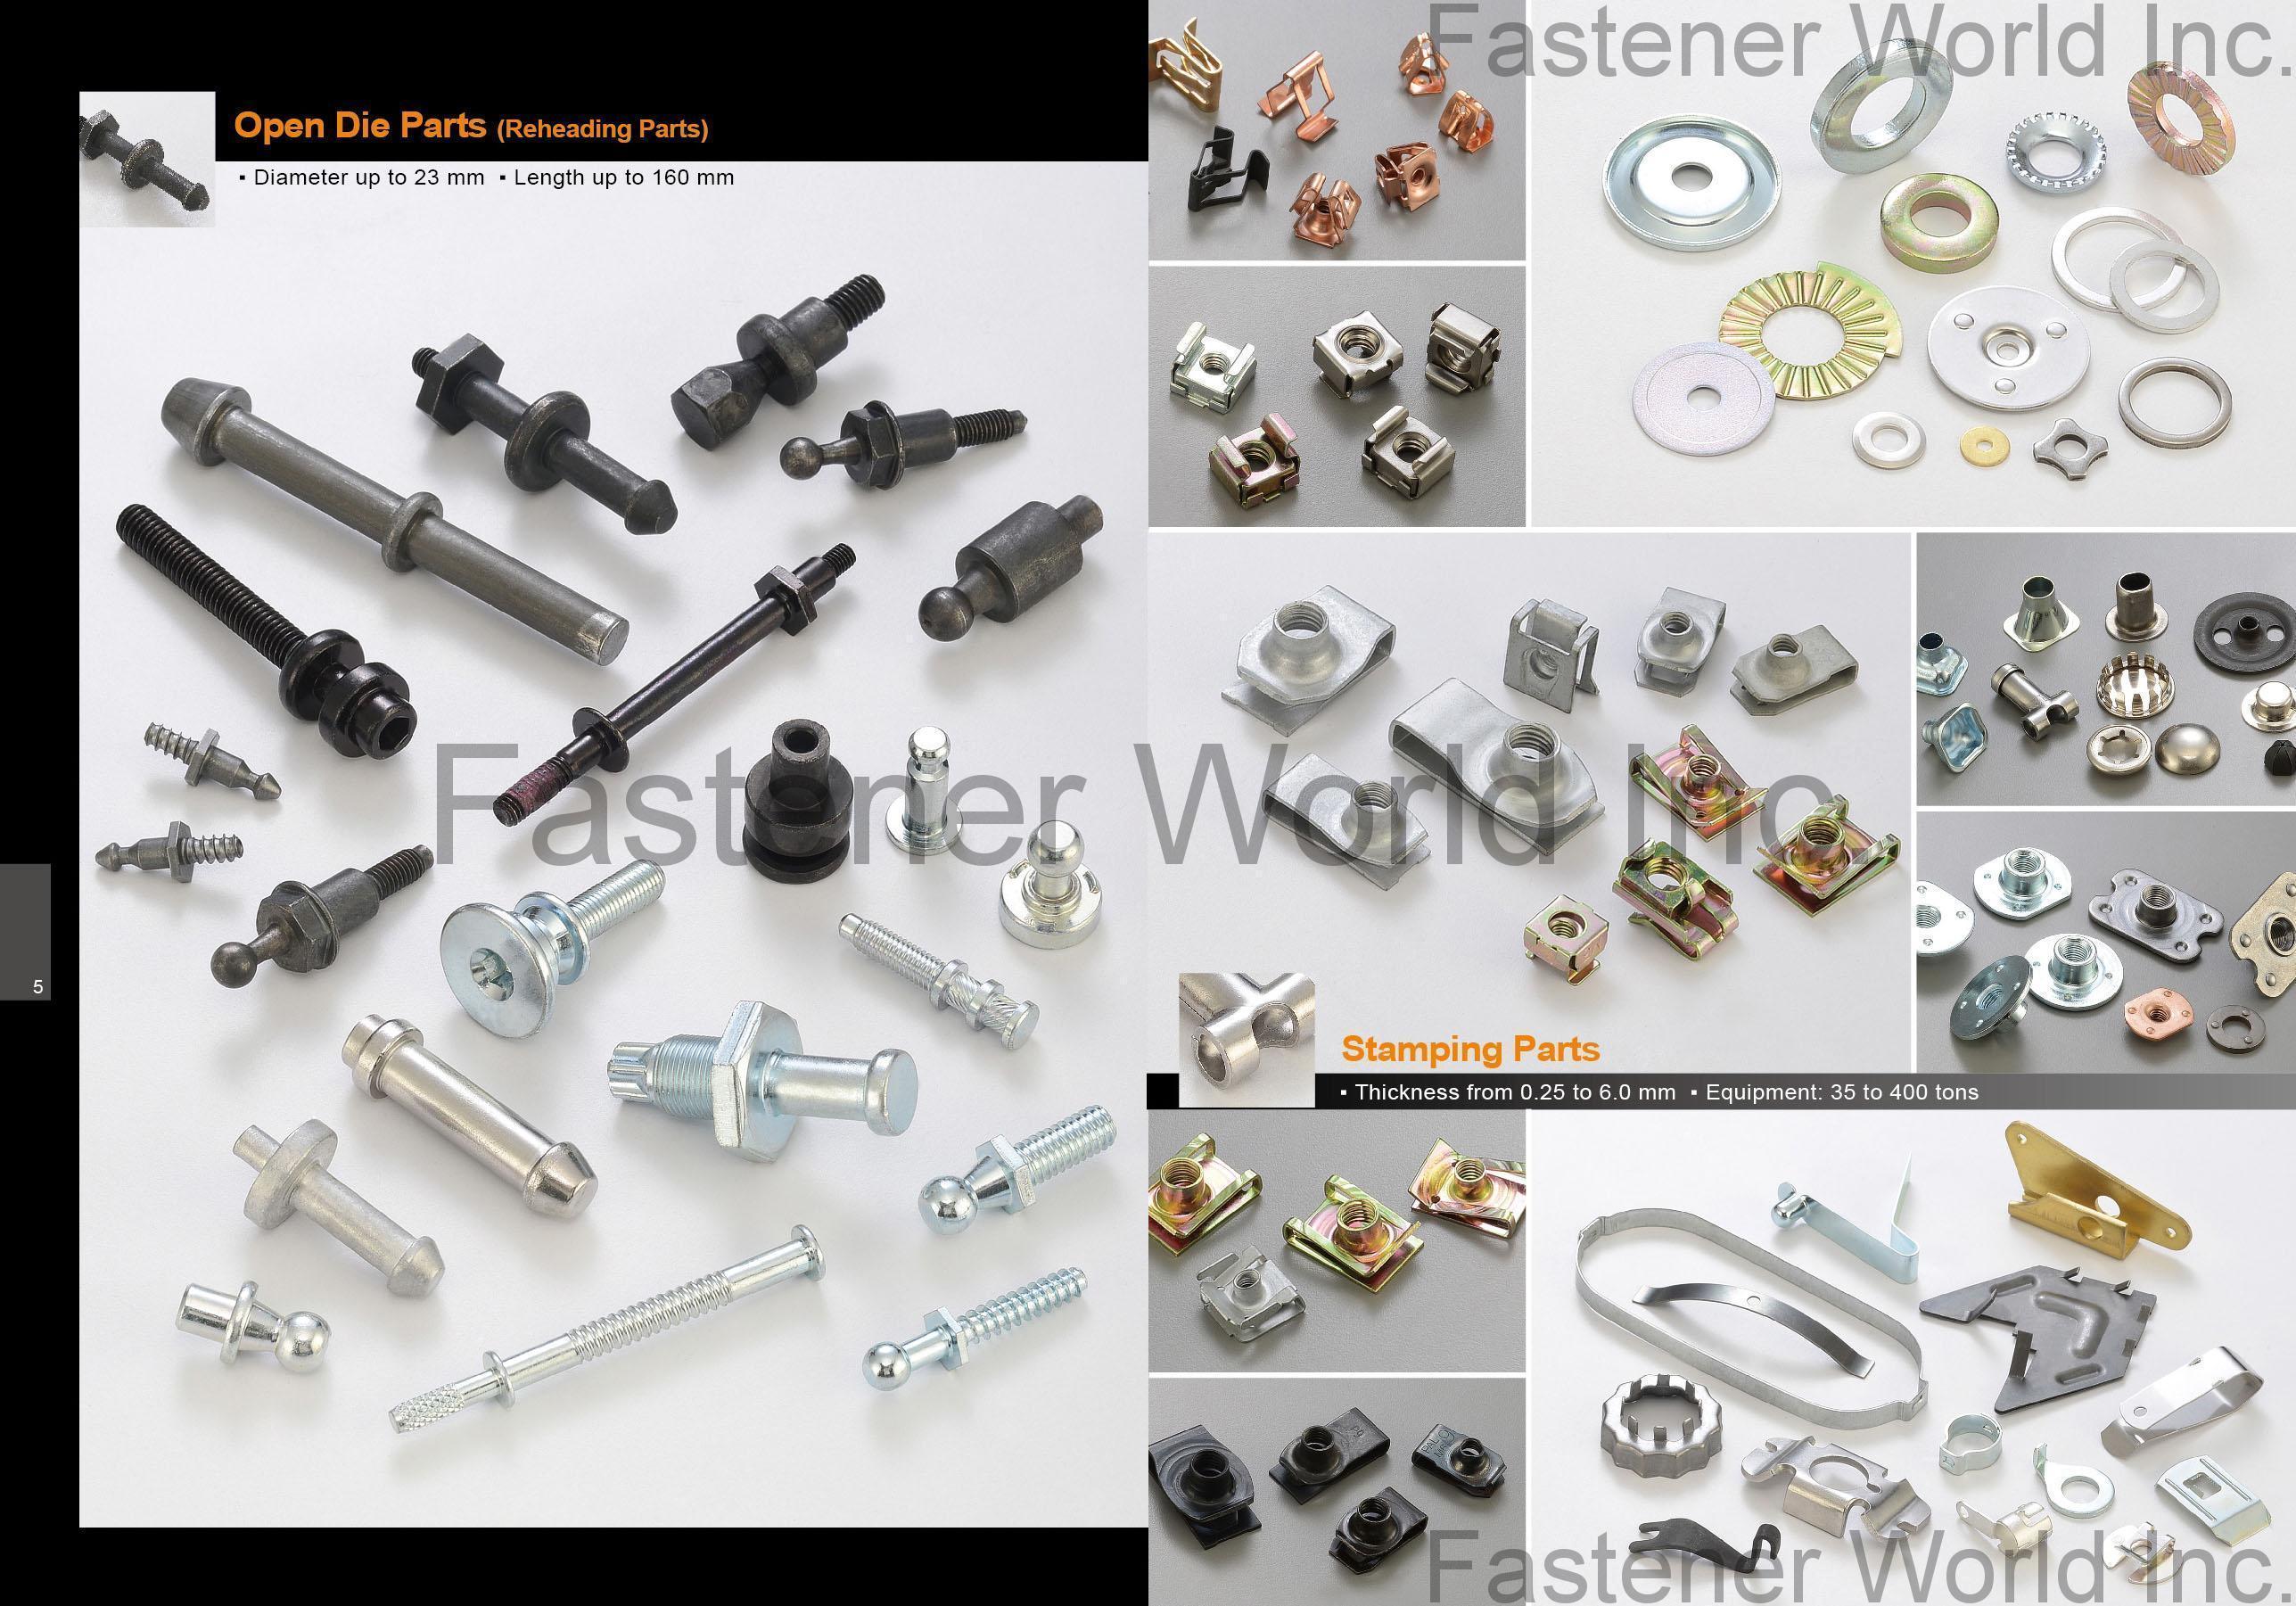 Stamped Parts Open Die Parts & Stamping Parts